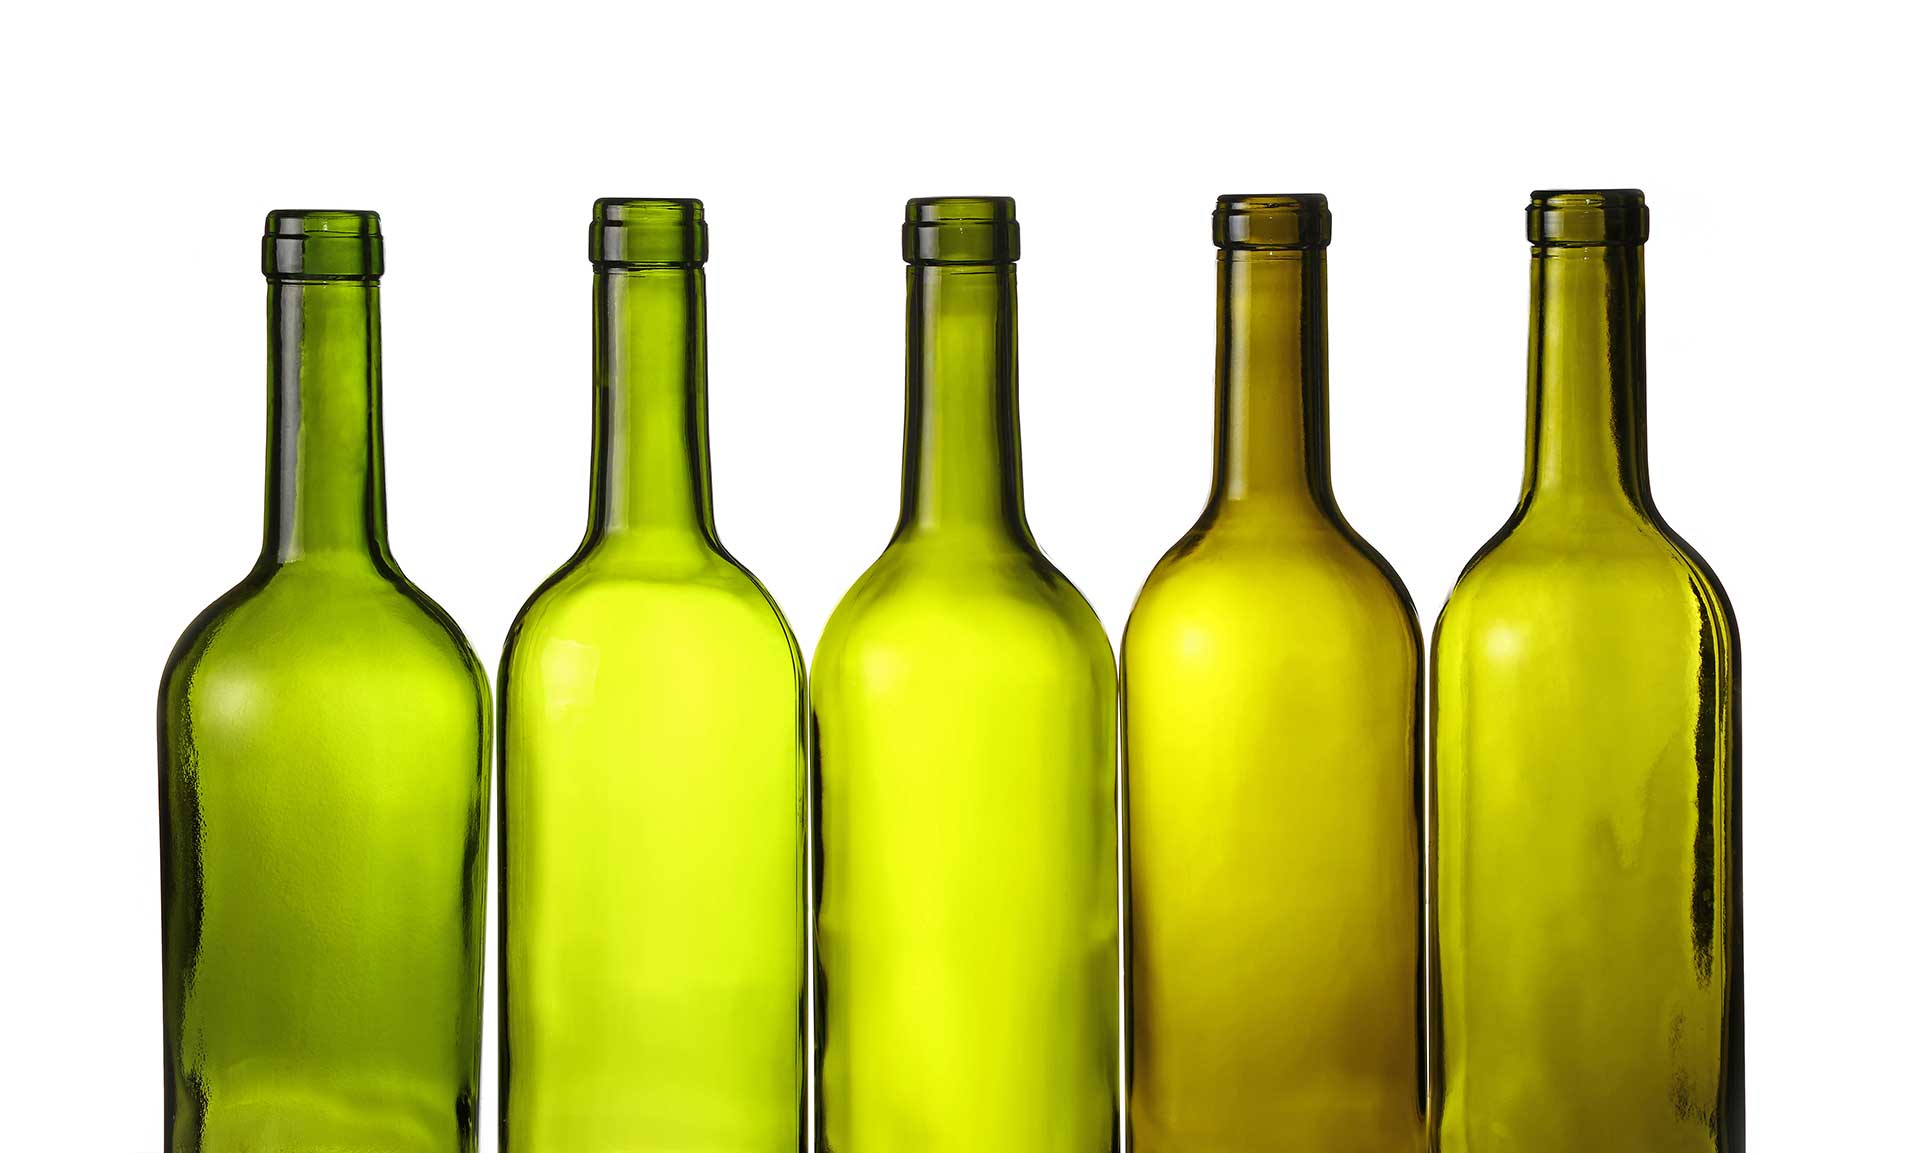 Rows of antique green wine bottles against a white background